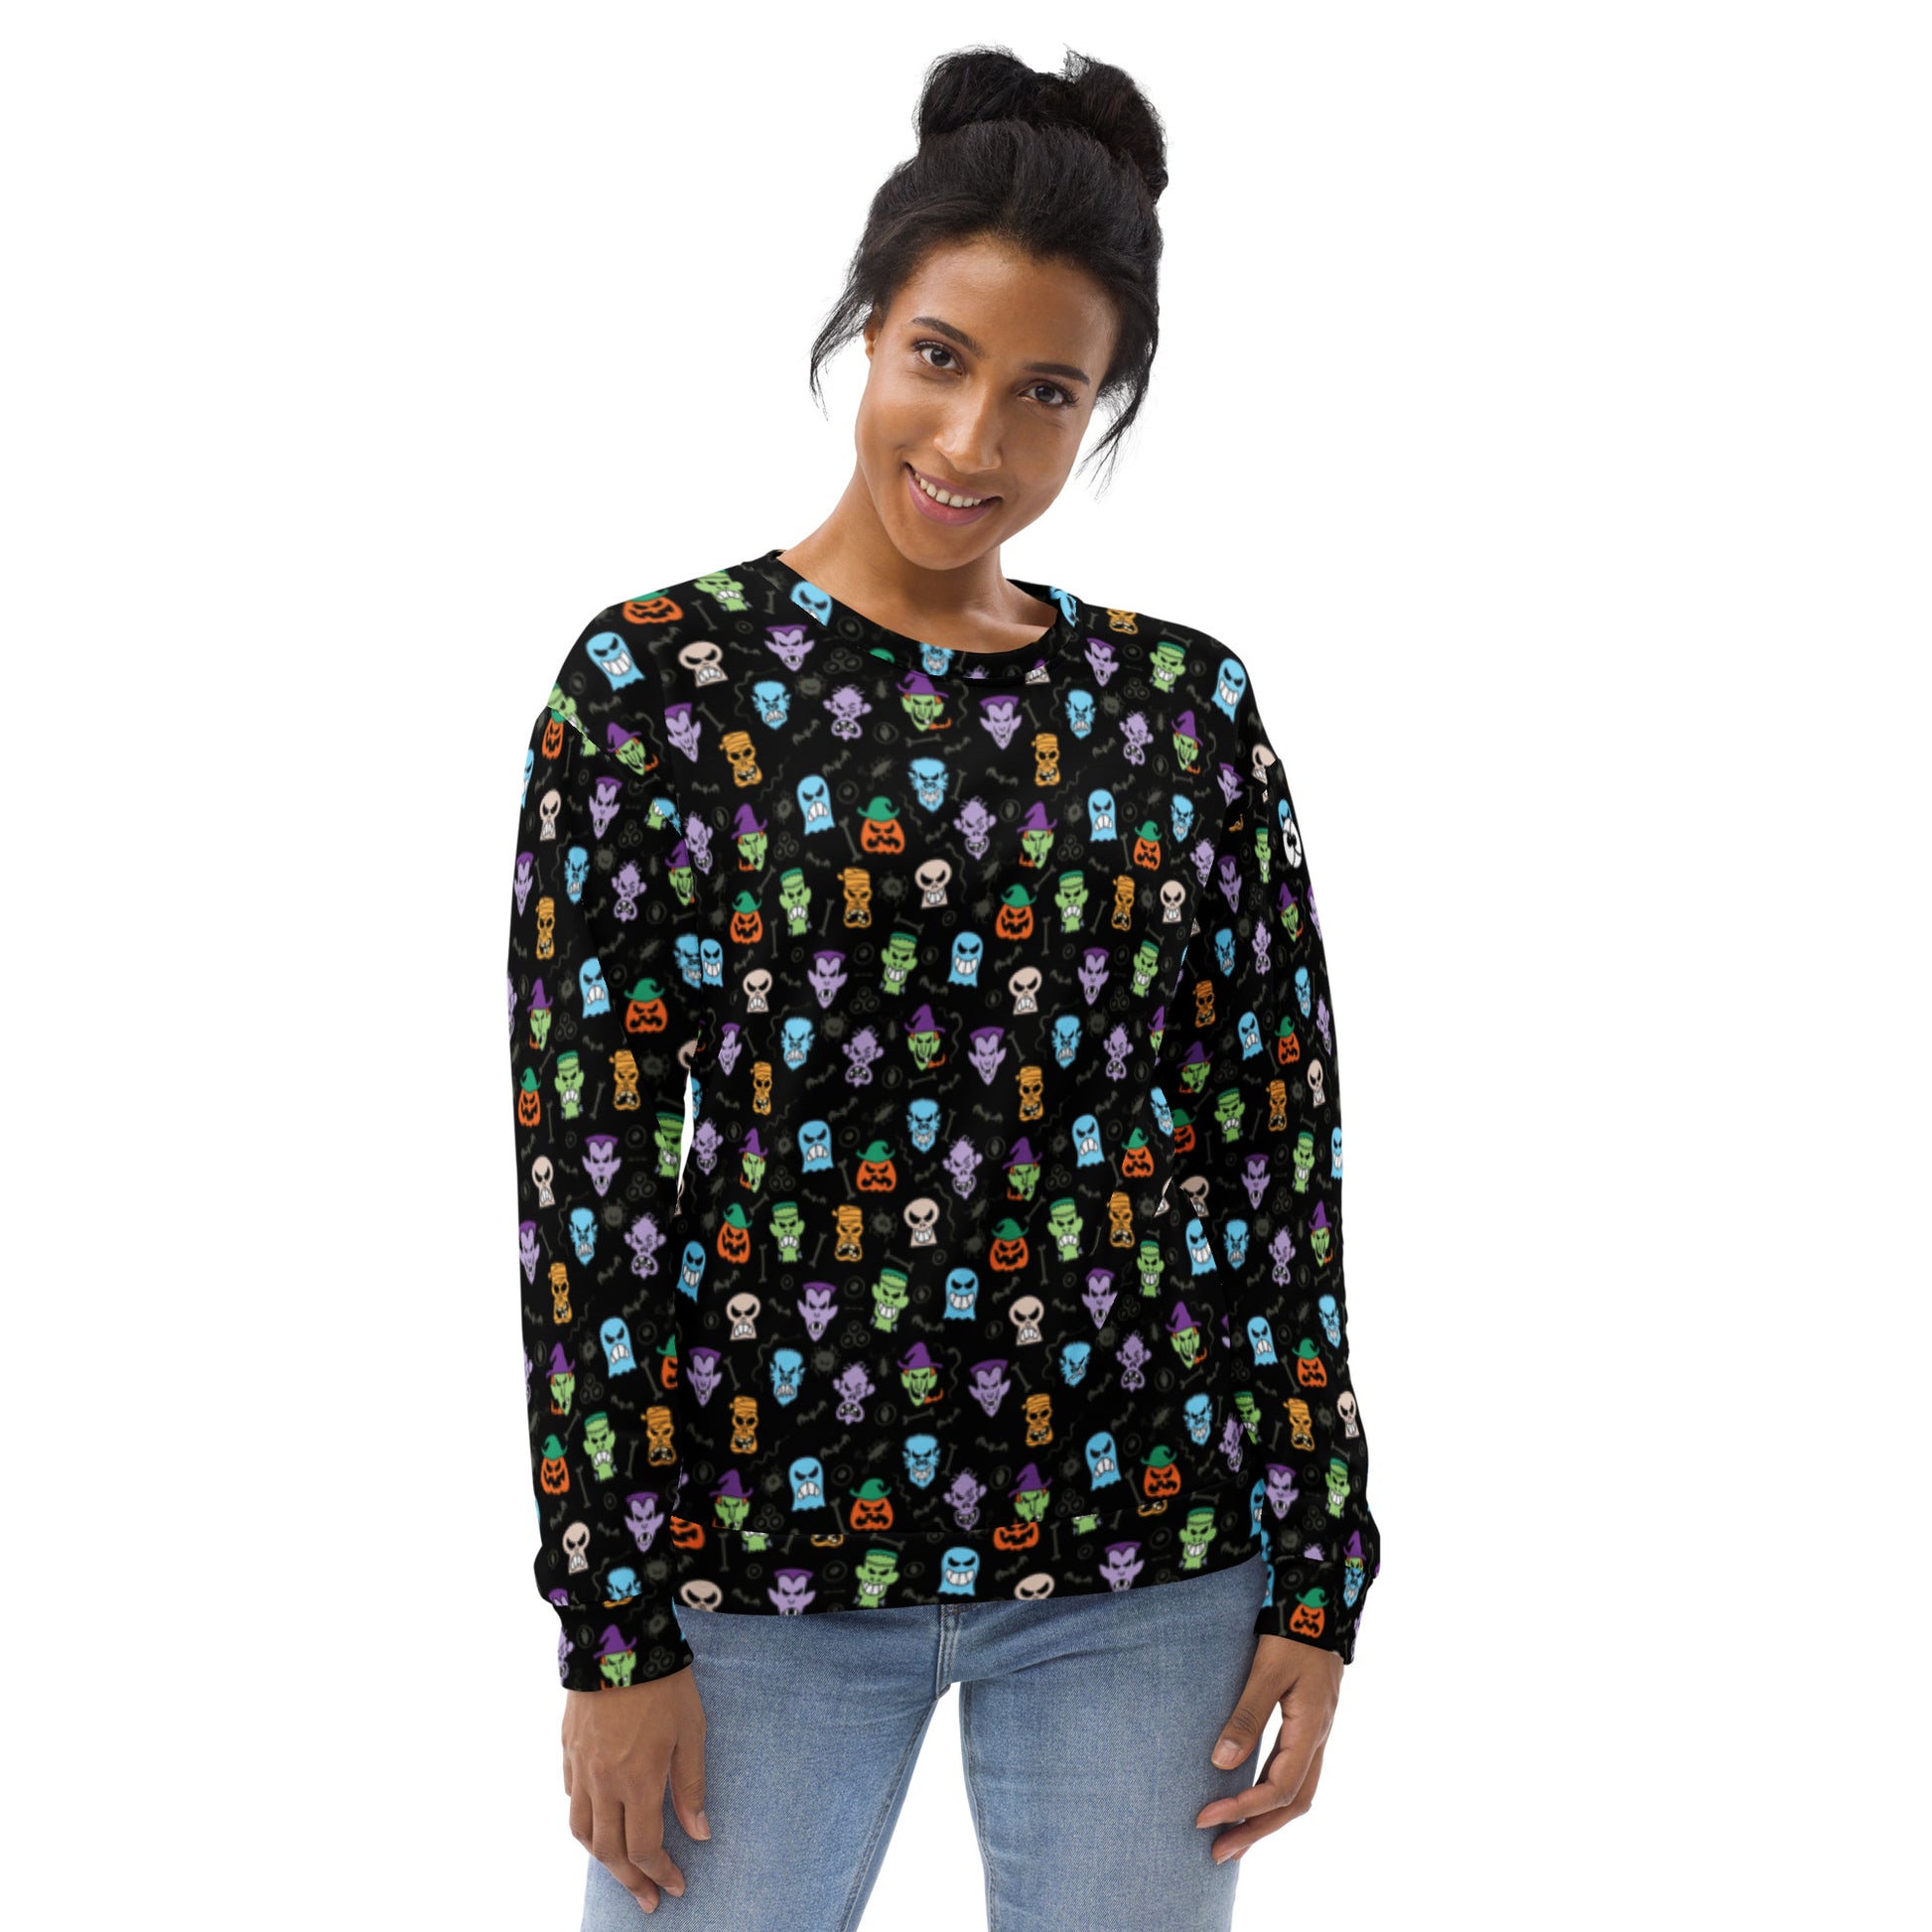 Scary Halloween faces Unisex Sweatshirt. Smiling woman wearing All-over print Sweatshirt by Zoo&co